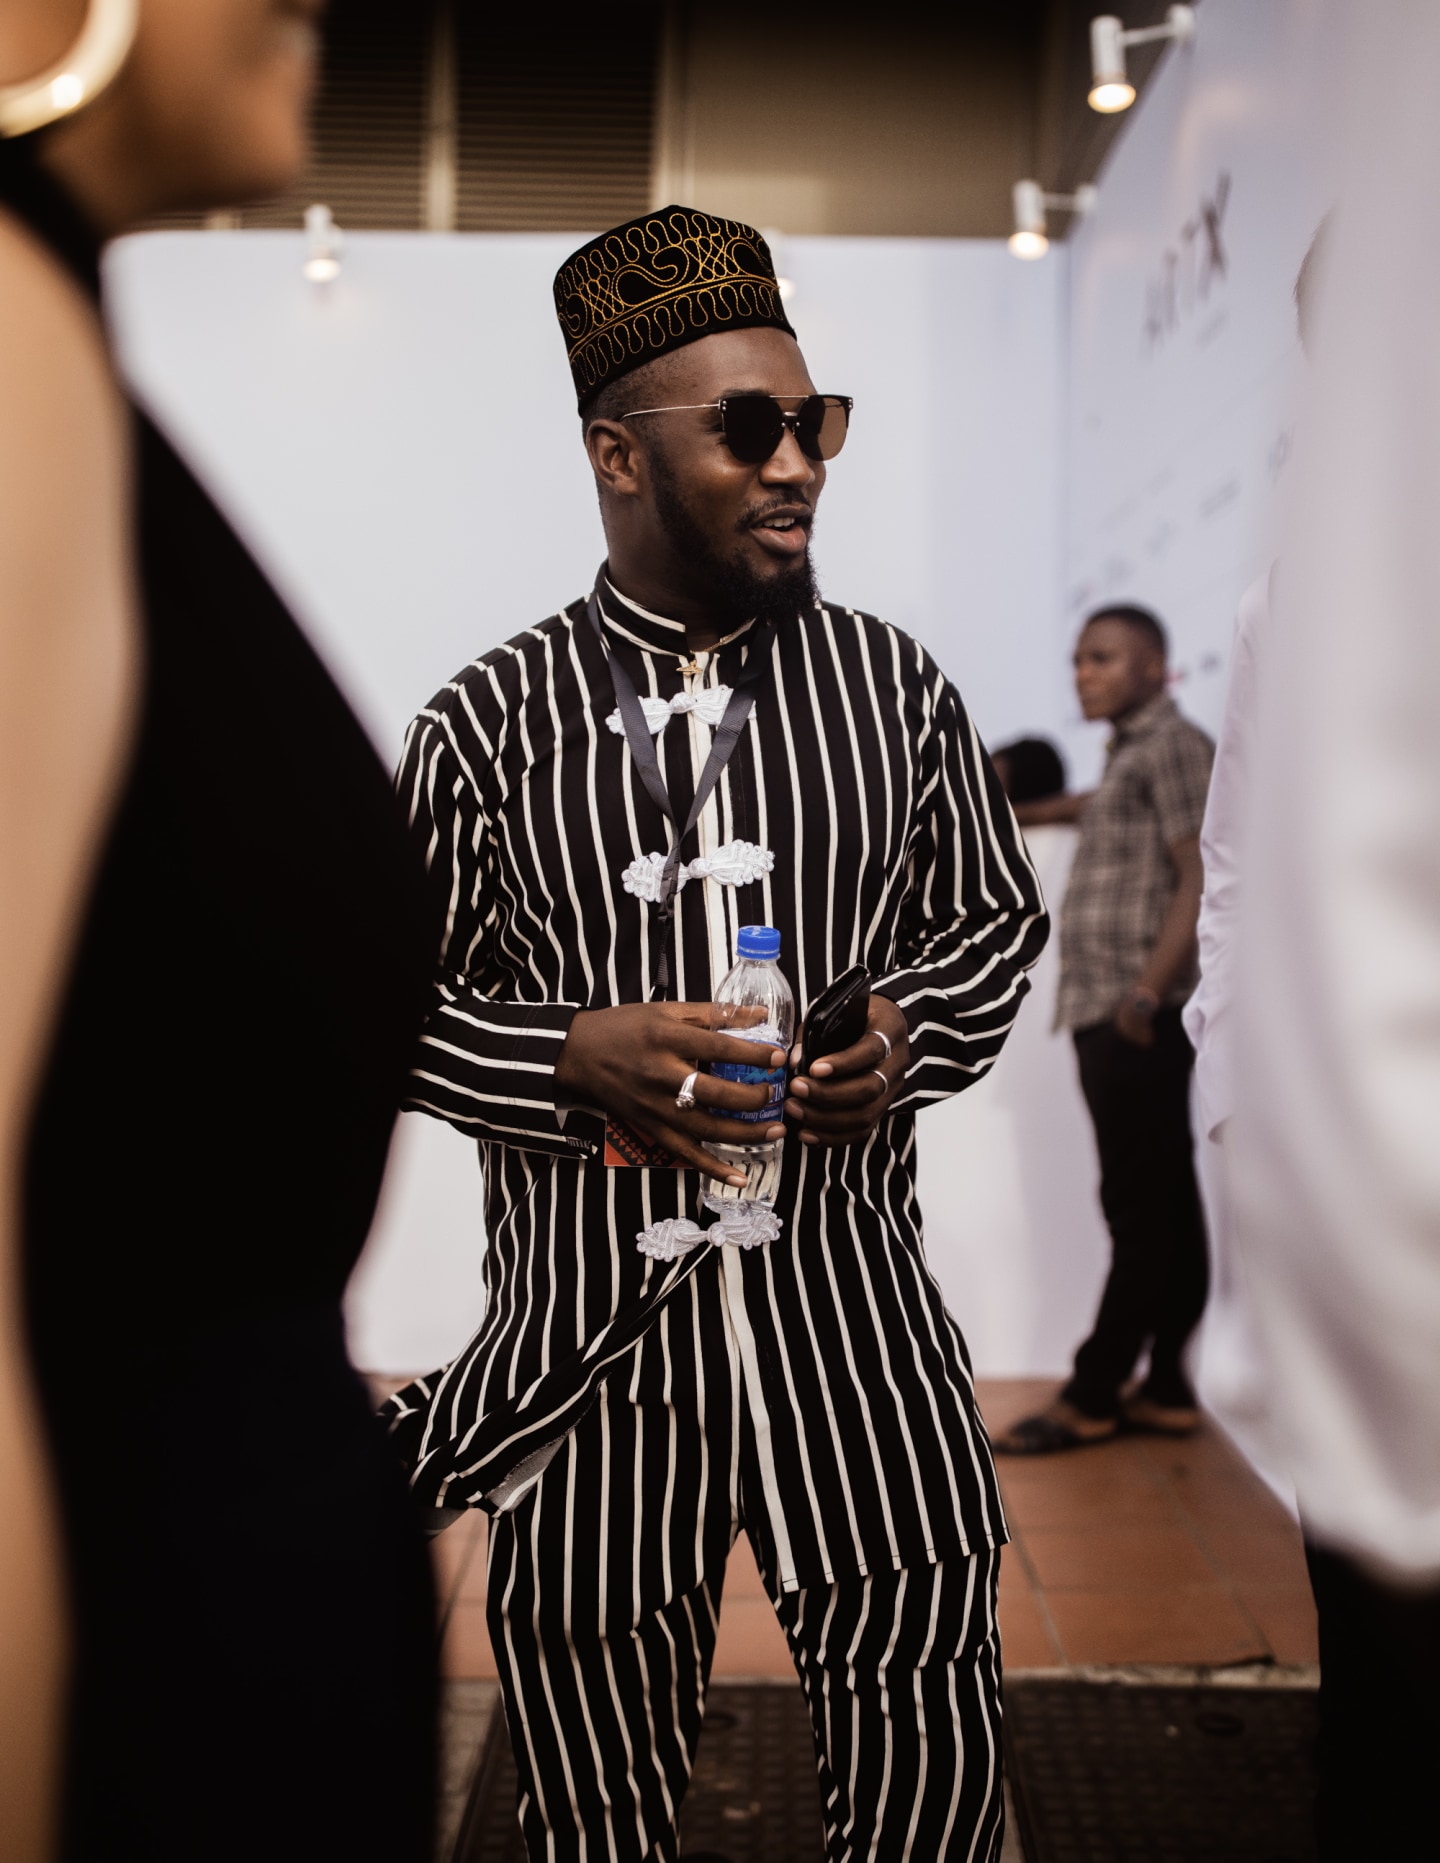 At ART X Lagos, dusk gave simple solids and bold patterns a whole new life